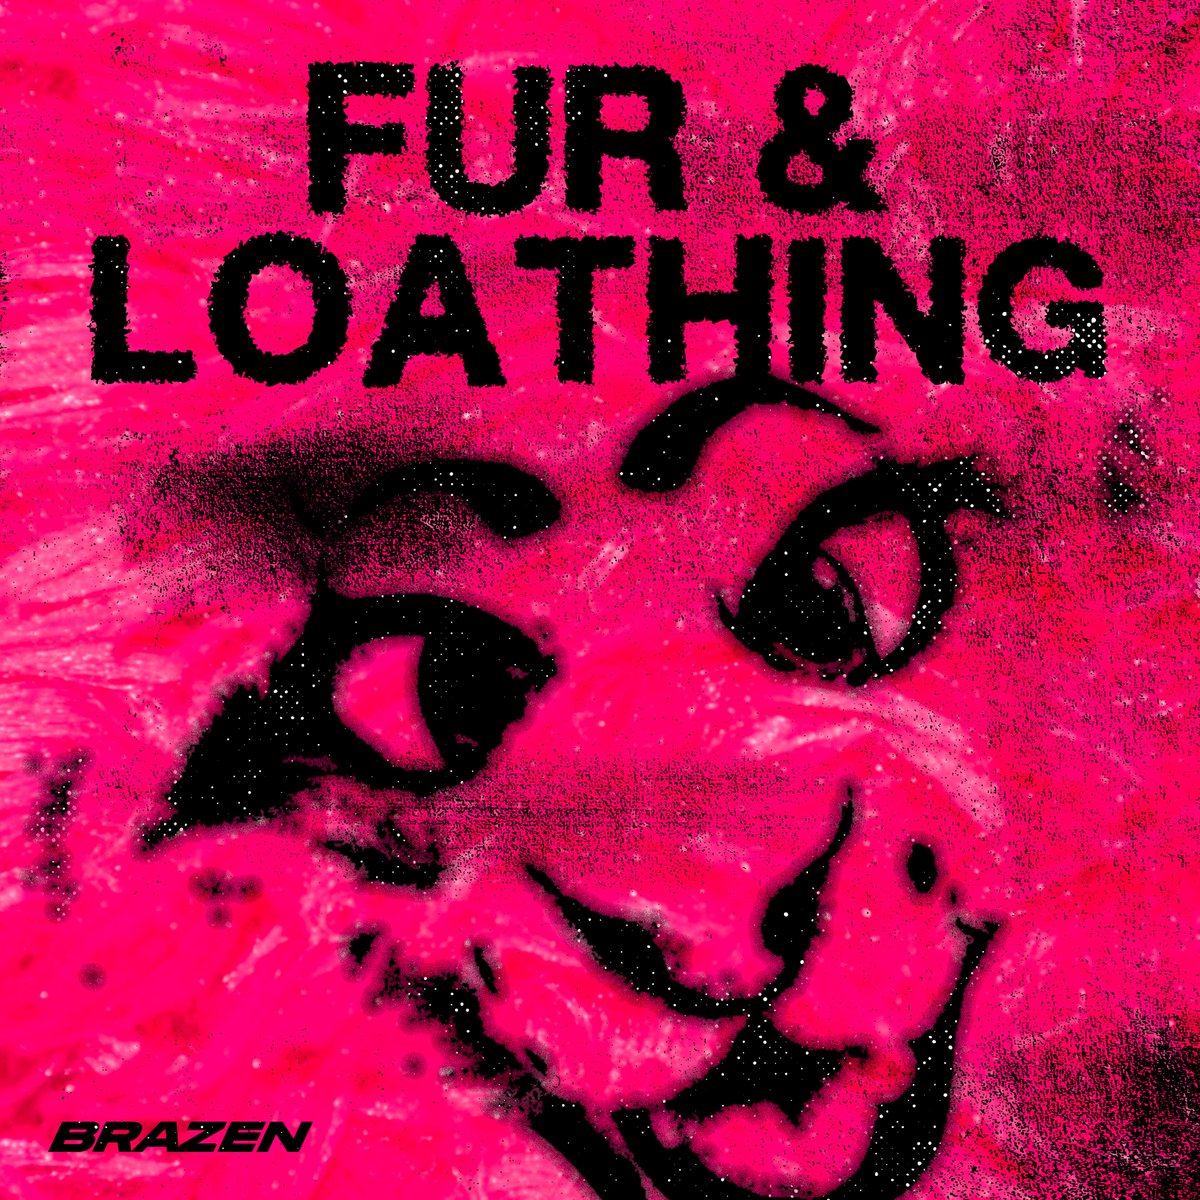 In December 2014, a chlorine gas bomb was set off at a convention for Furries, hospitalising 19 people. It’s one of the largest chemical weapon terrorist attacks in American history – and it remains an unsolved mystery. Who did it? And… why? Fur & Loathing, coming soon from…